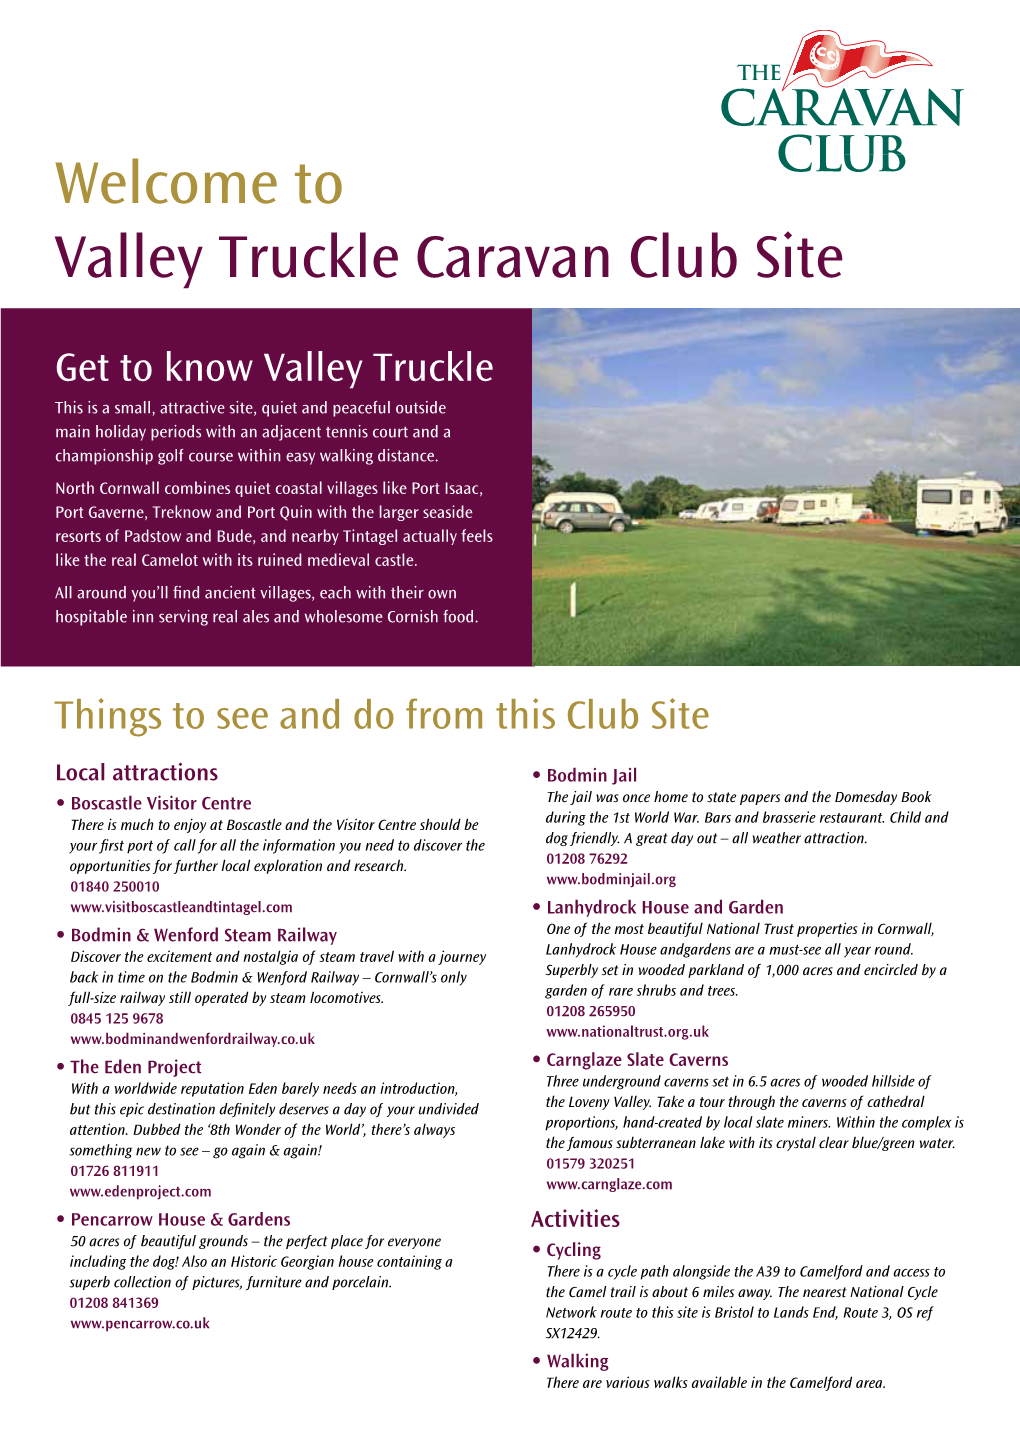 Welcome to Valley Truckle Caravan Club Site